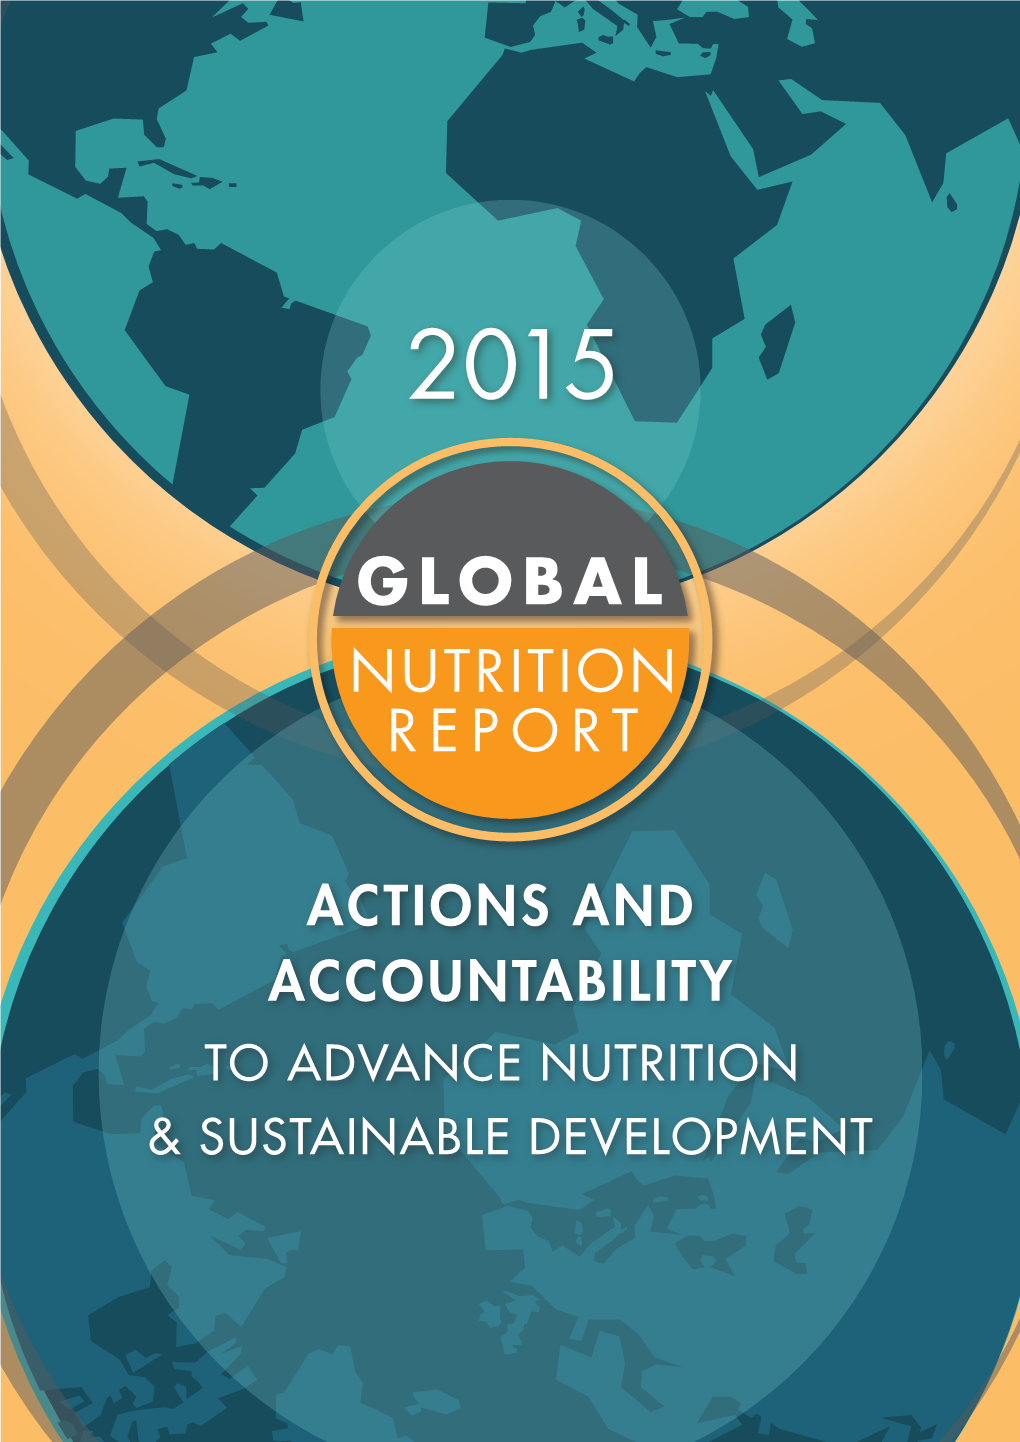 Global Nutrition Report 2015: Actions and Accountability to Advance Nutrition and Sus- Tainable Development